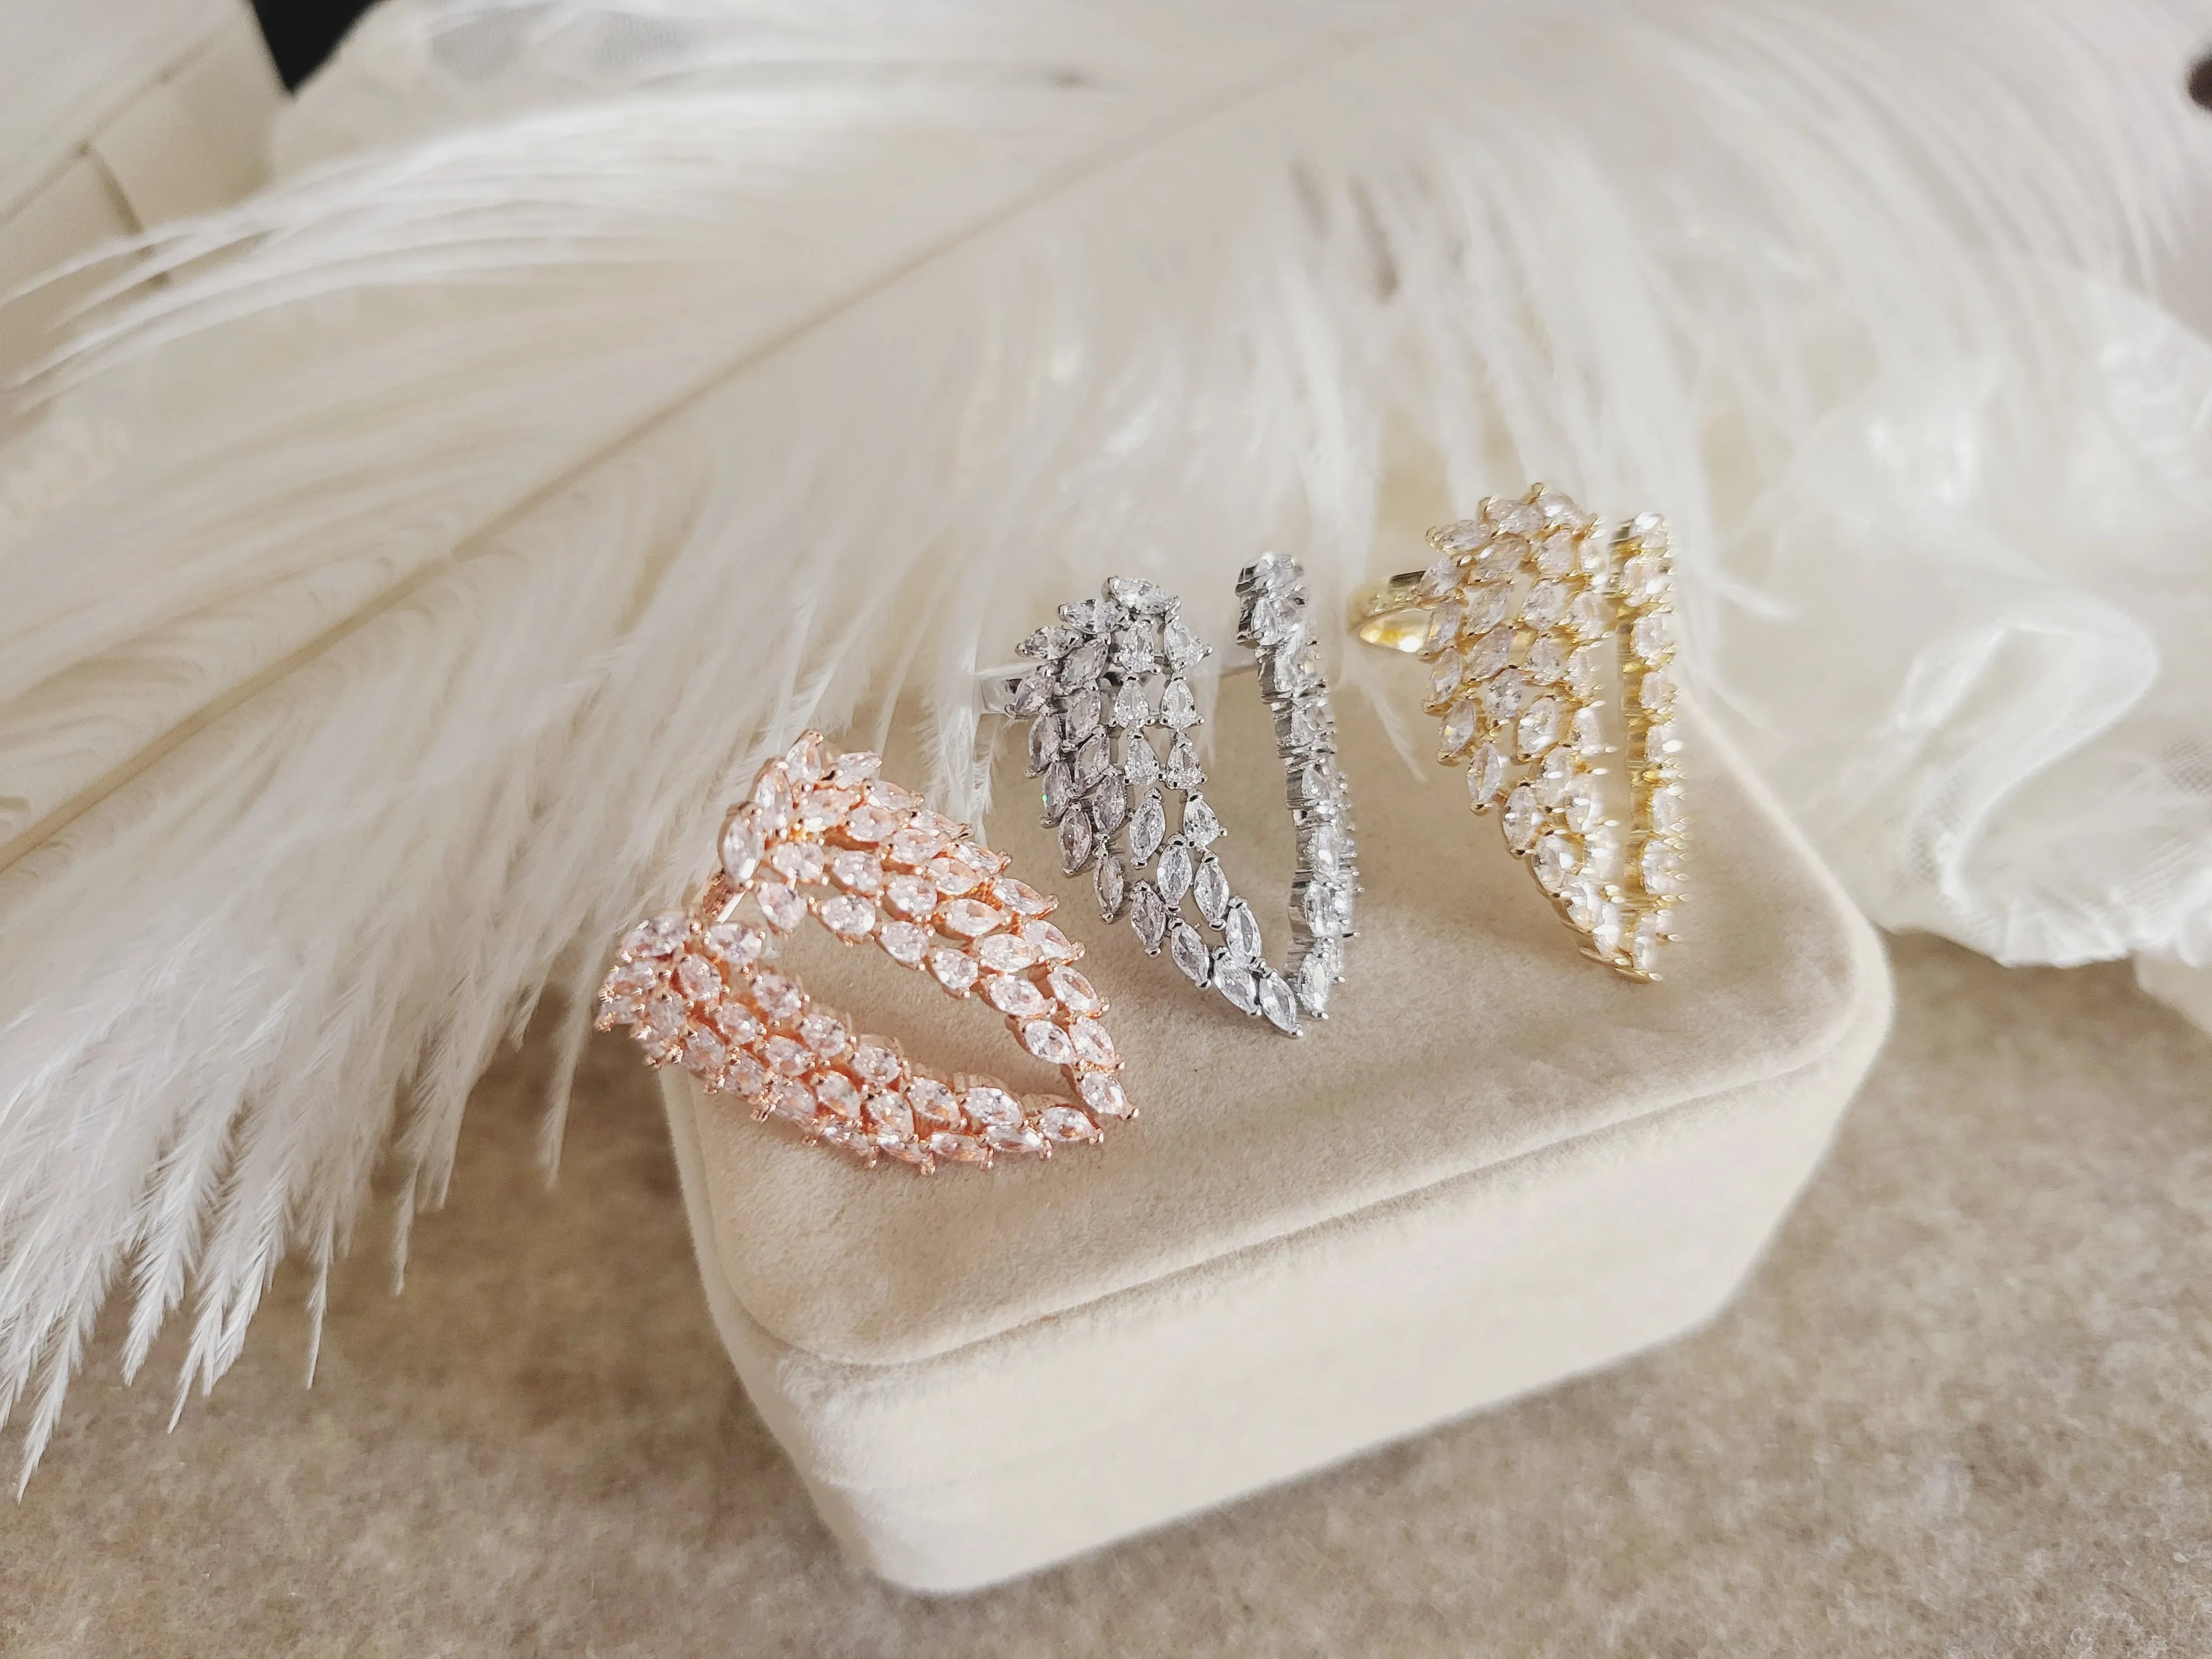 Angel Wings Rings product images.